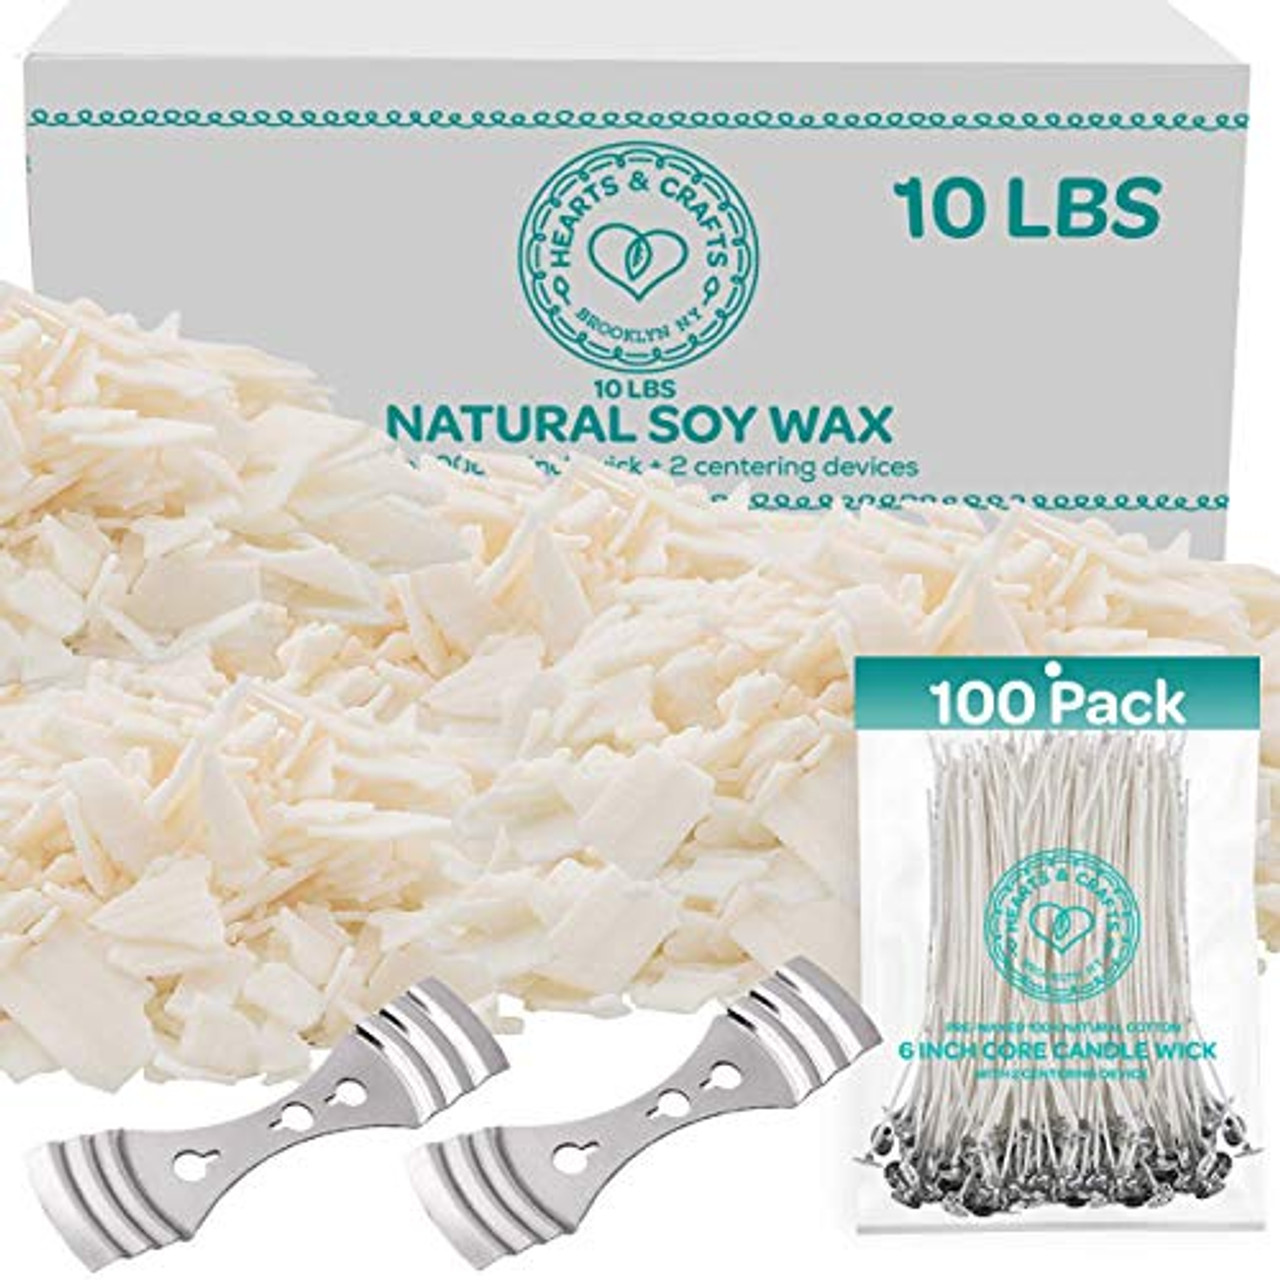 Natural Soy Candle Wax and Candle Making Supplies - 10 lbs Soy Wax